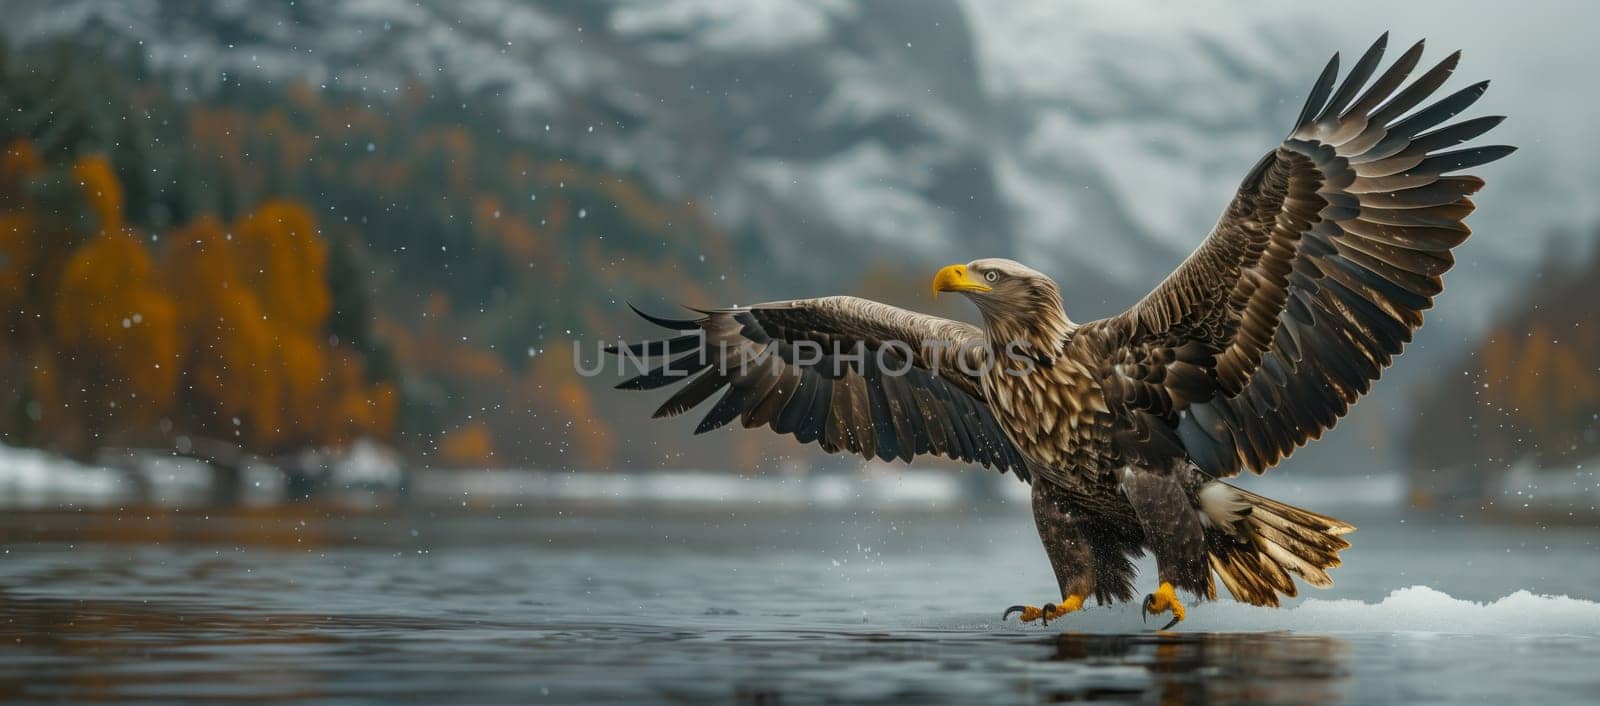 A Bald Eagle, a bird of prey in the family Accipitridae and order Falconiformes, gracefully flies over a lake with its wings spread, gliding above the shimmering liquid water